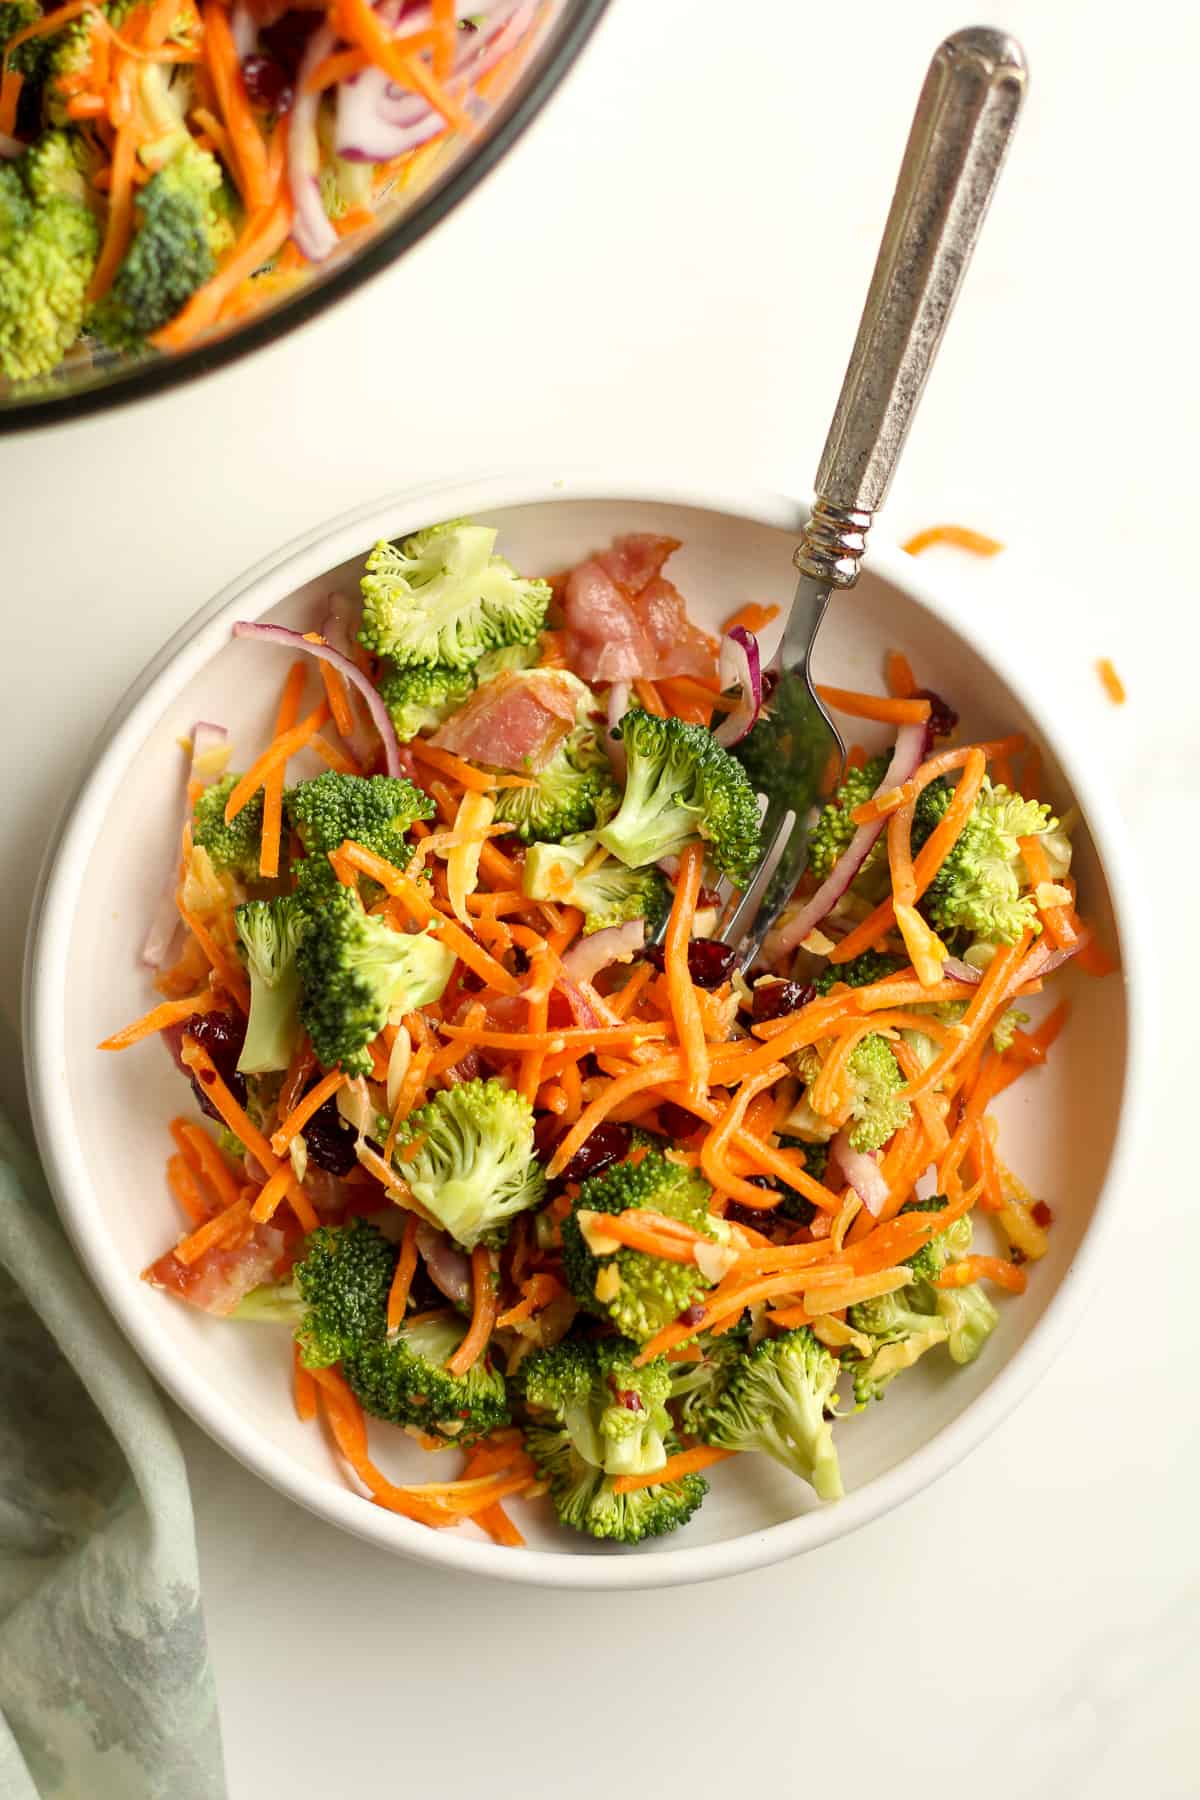 A serving bowl of the broccolis salad with a fork inside.